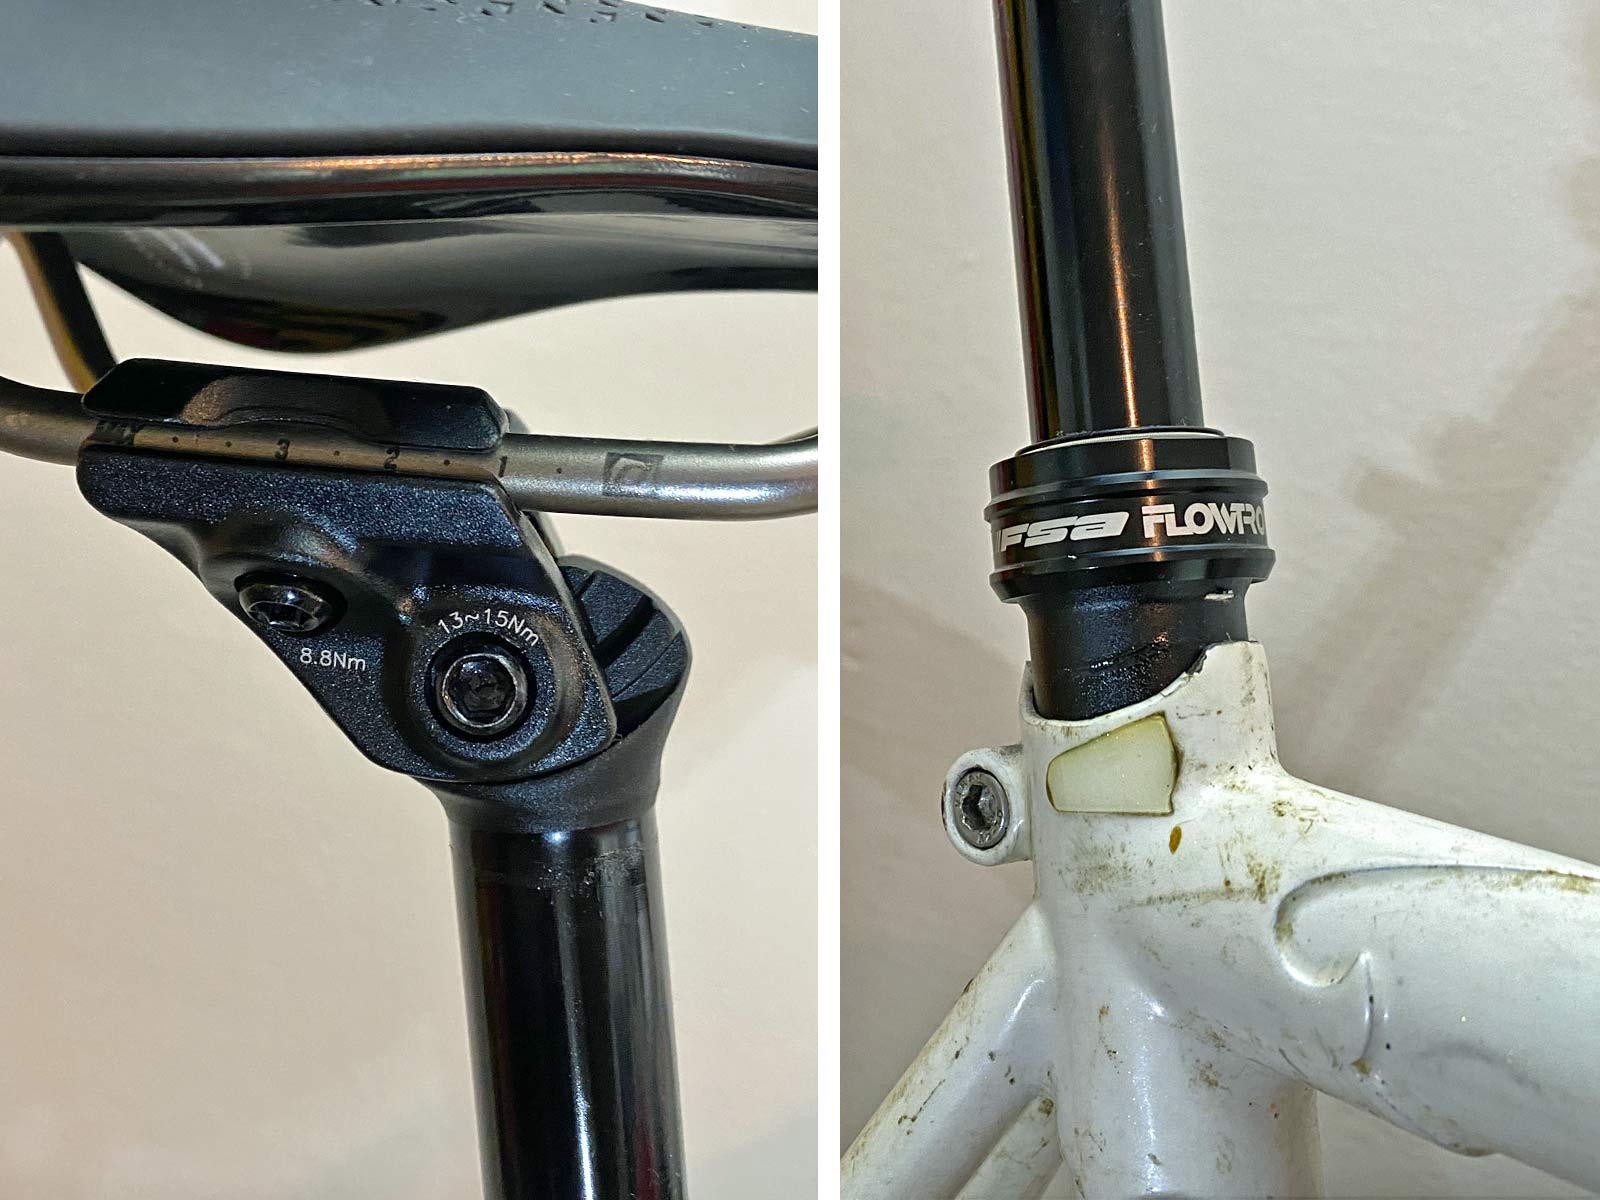 FSA Flowtron AGX gravel dropper post, First Look Review: 27.2mm internally routed dropper seatpost with dropbar remote, dropper details